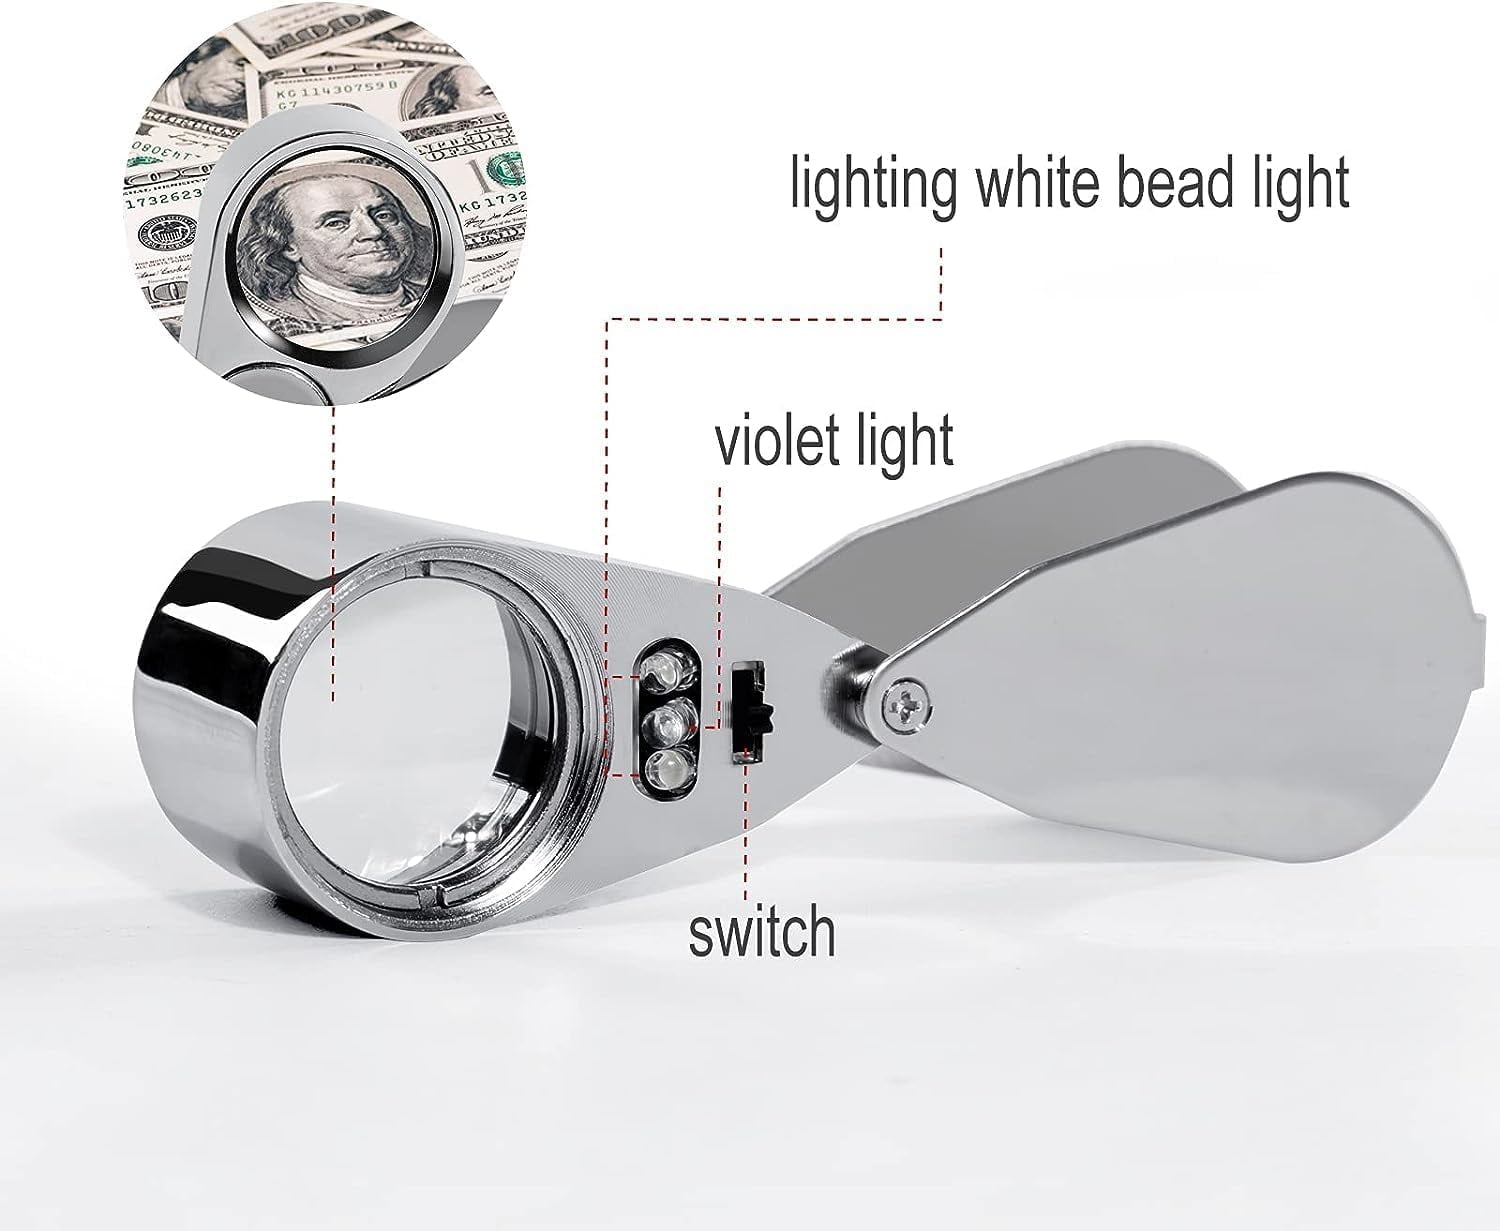 40X Full Metal Illuminated Jewelry Loop Magnifier, XYK Pocket Folding  Magnifying Glass Jewelers Eye Loupe with LED(LED Currency Detecting/Jewelry